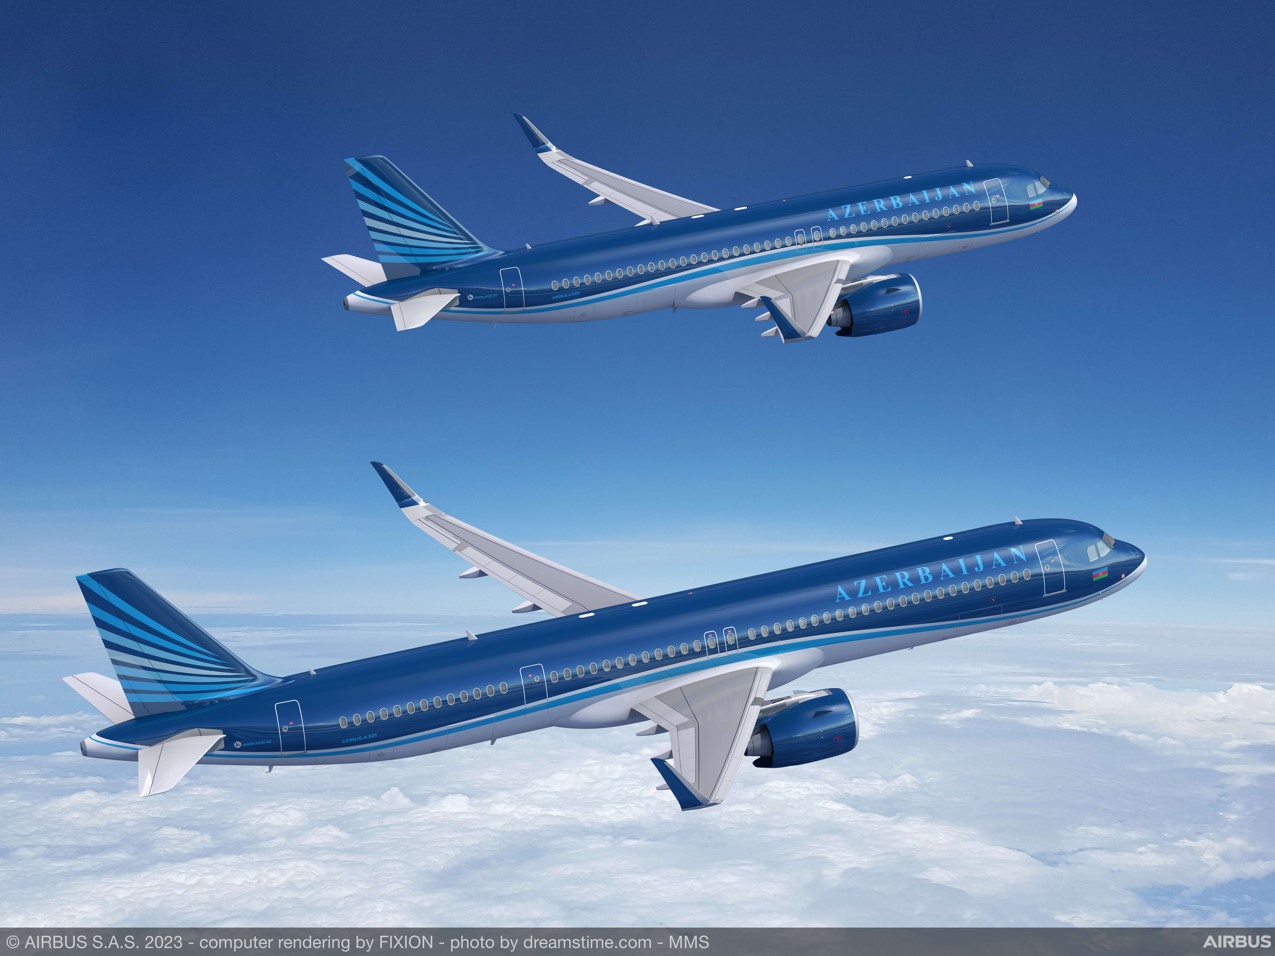 Render of 2 Azerbaijan Airlines Airbus A320neo aircraft in flight.